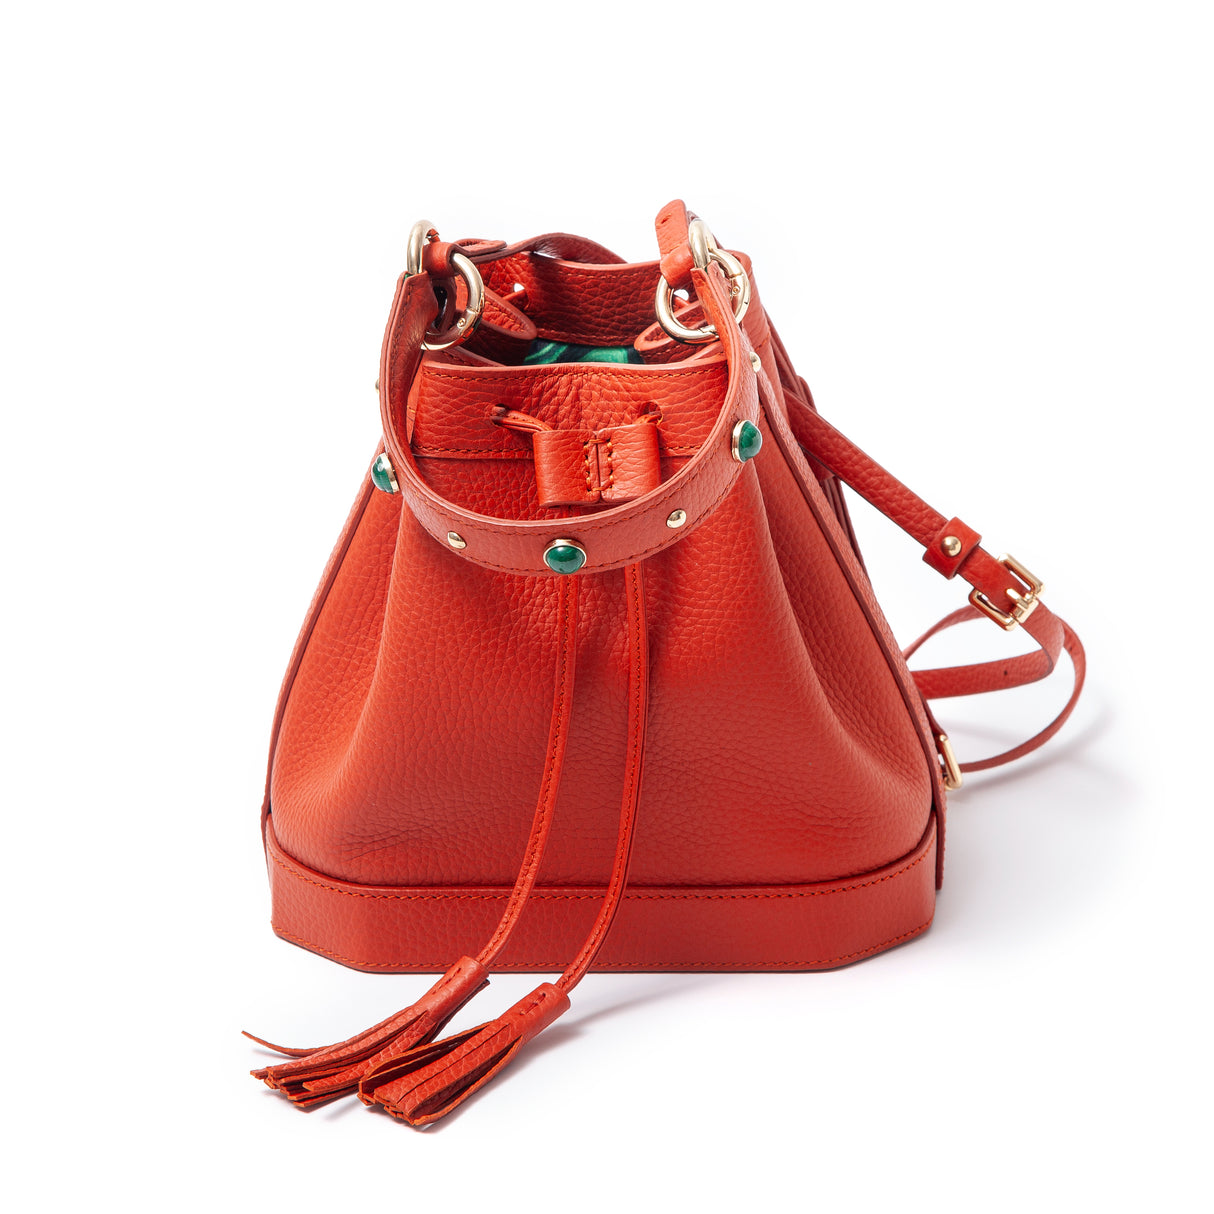 Madame Malachite Jeweled with malachite and agate stones, this bucket bag will help you catch those special moments.  100% Leather, natural malachite stone 